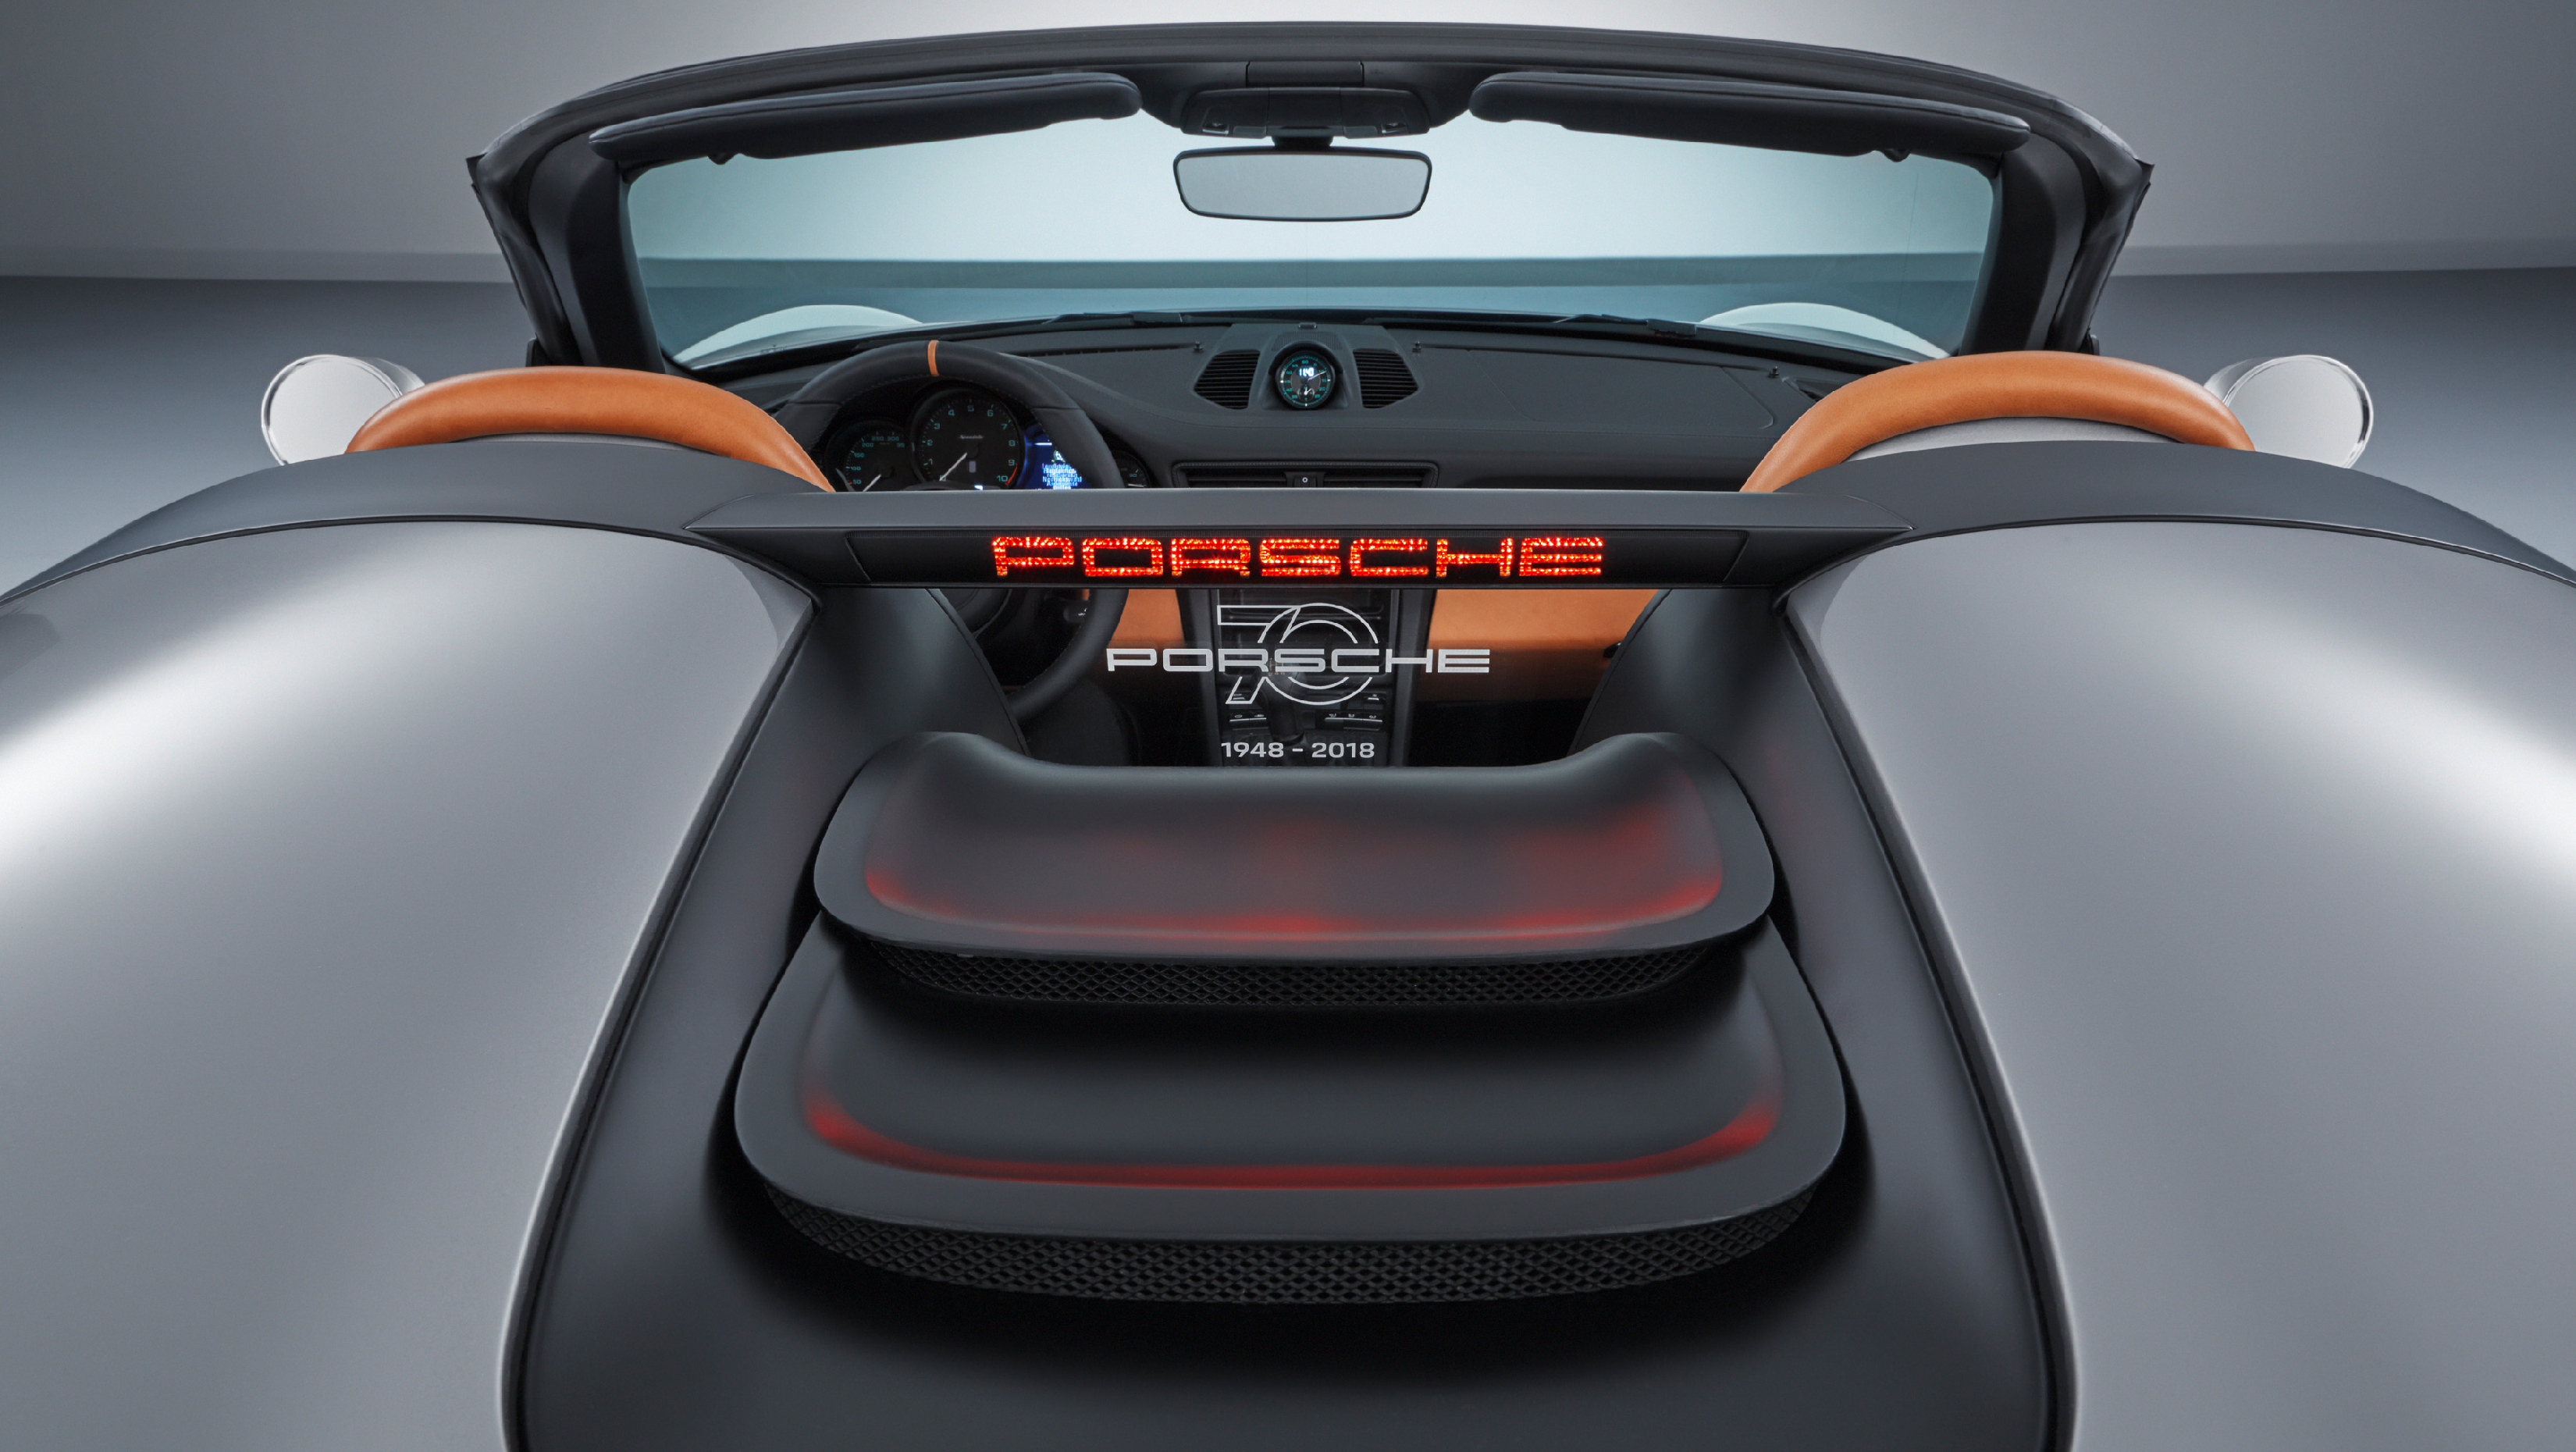 500hp porsche 911 speedster coming in 2019 as limited edition model 3247508 concept 2018 ag